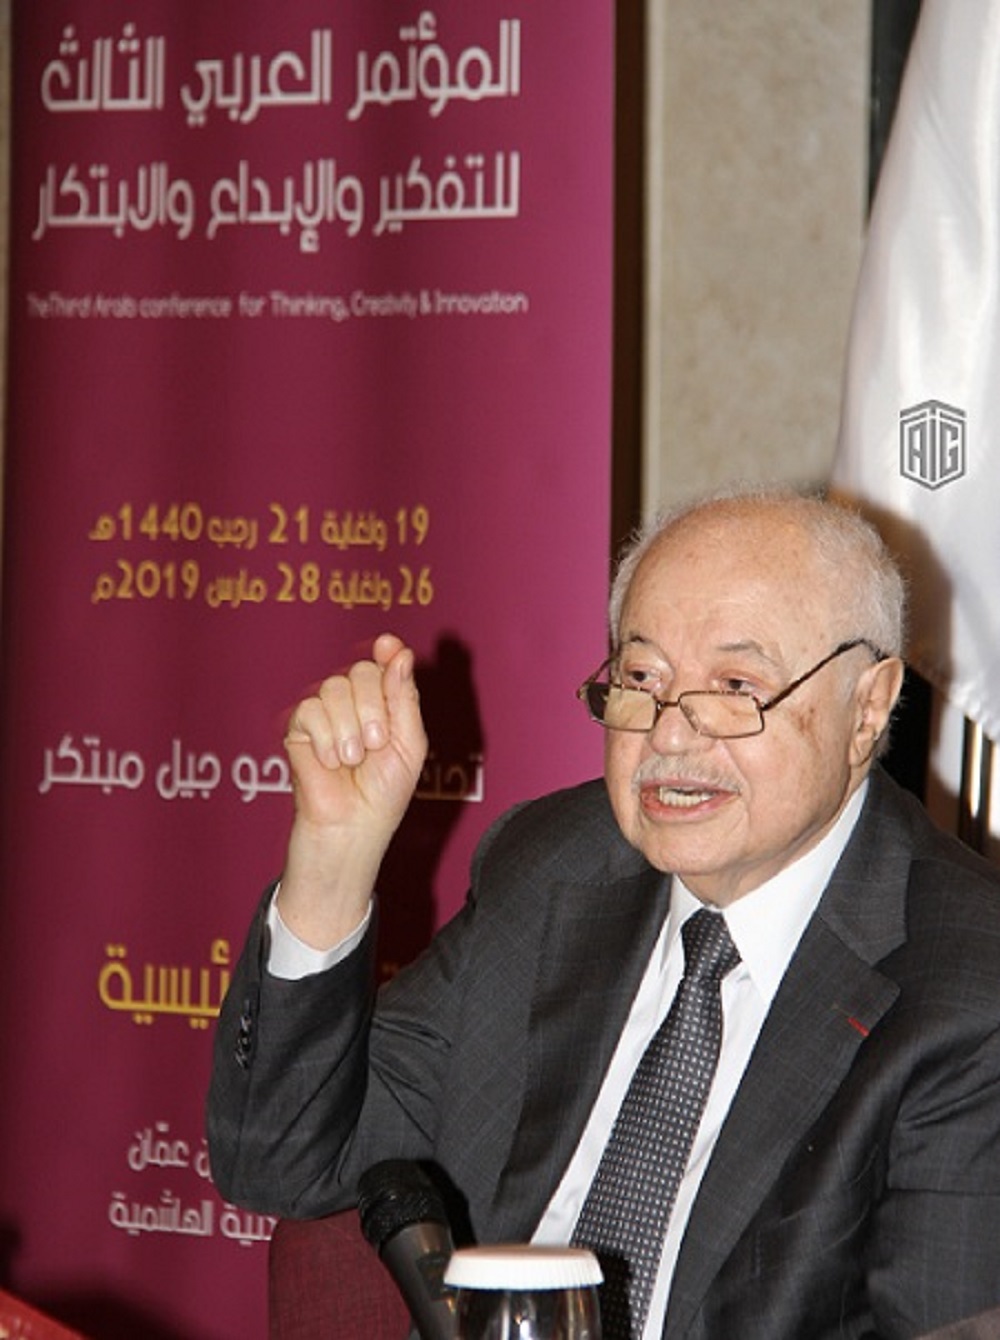 Abu-Ghazaleh calls for changing the educational culture and developing the academic curriculum